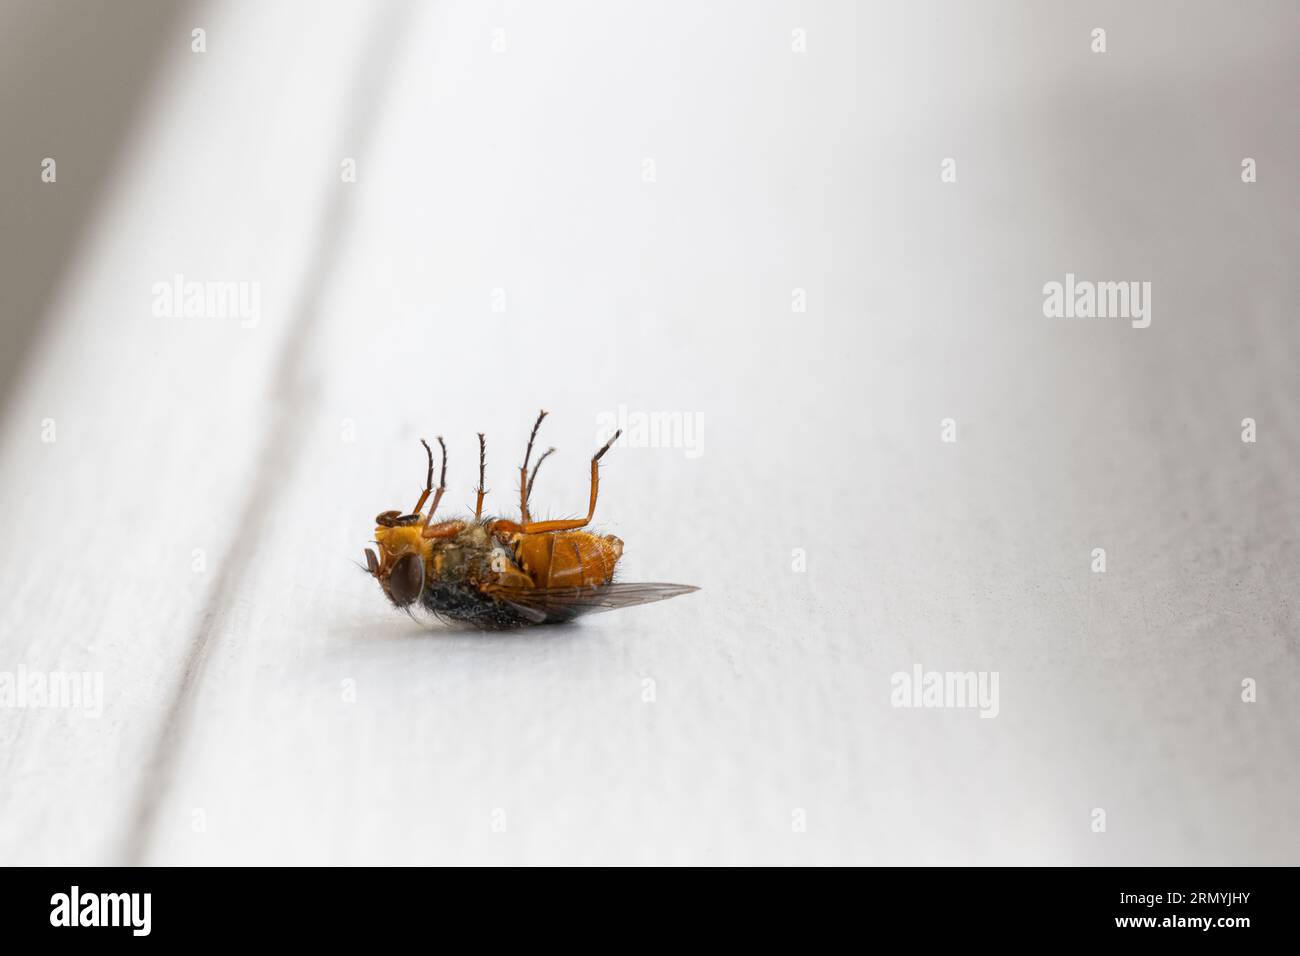 Fly with golden abdomen laying on her back on a white windowsill Stock Photo